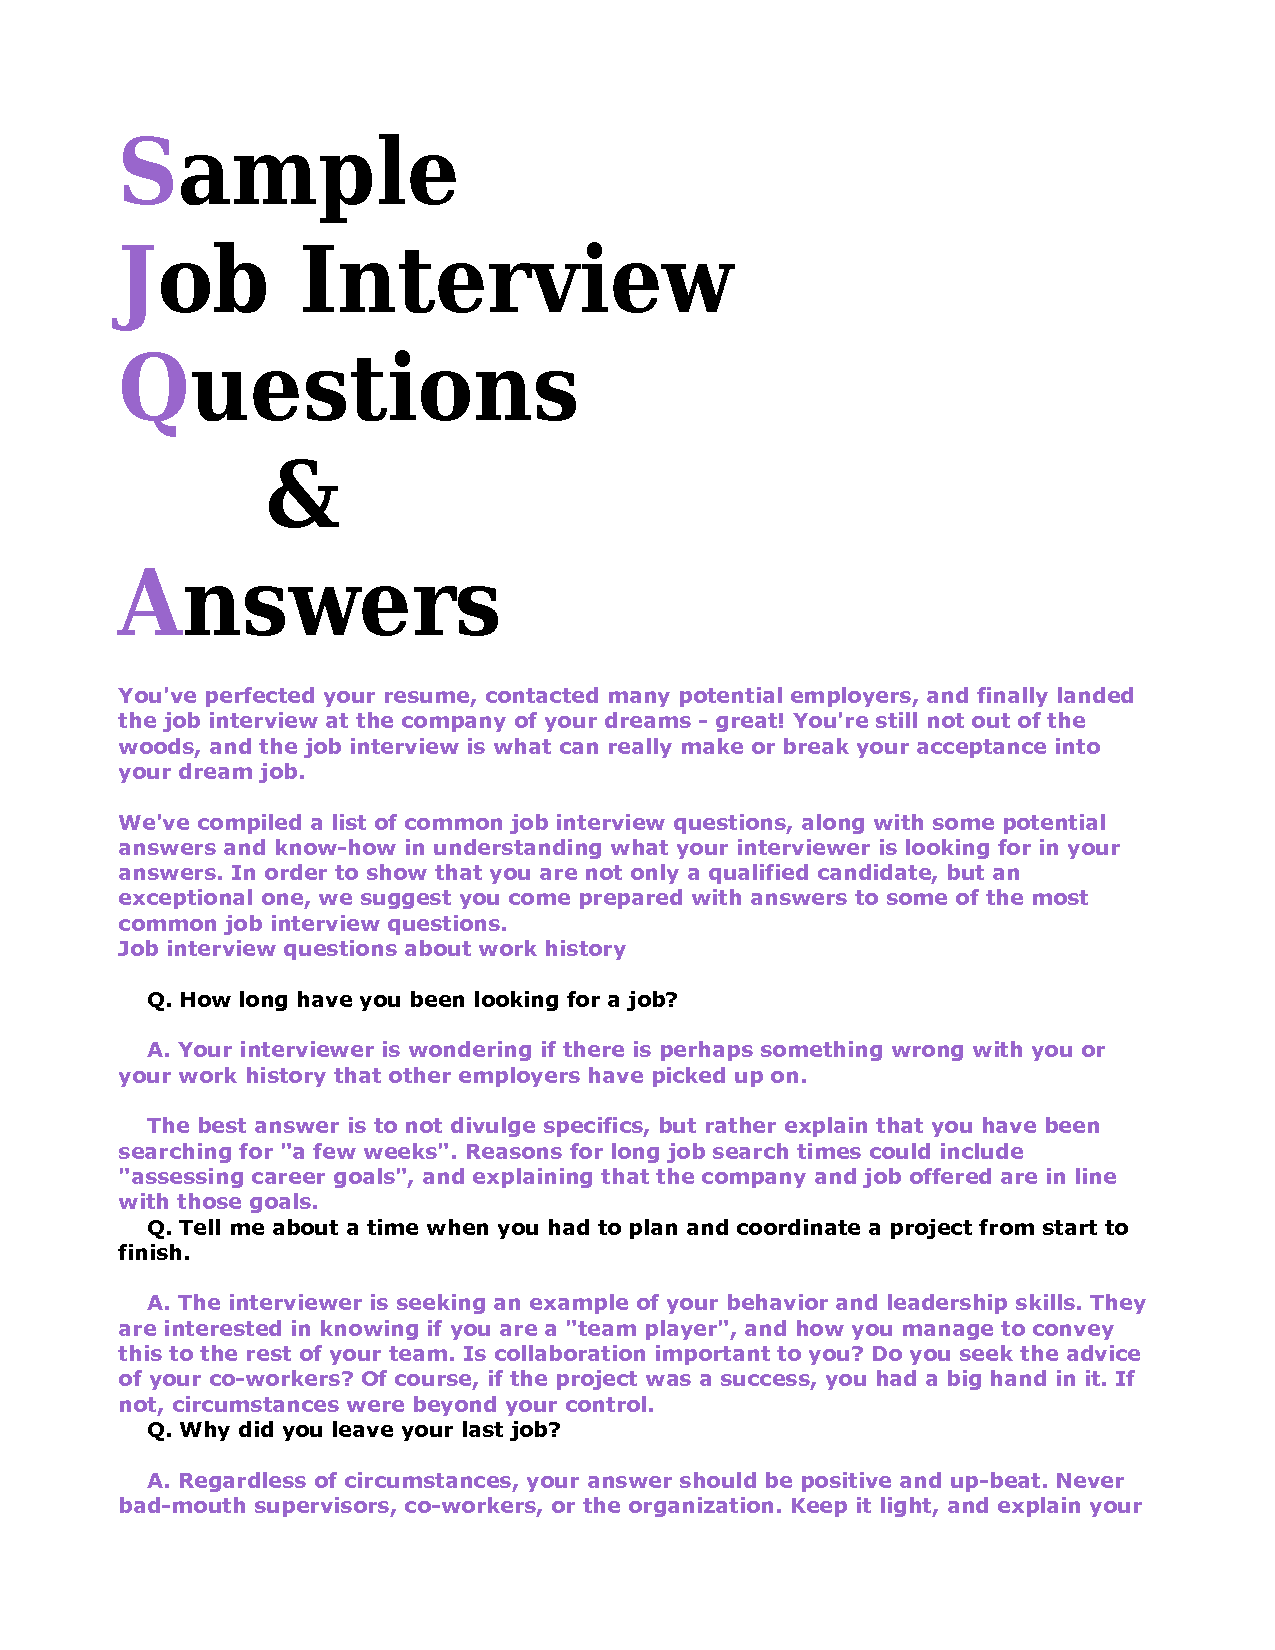 Best way to answer job application questions